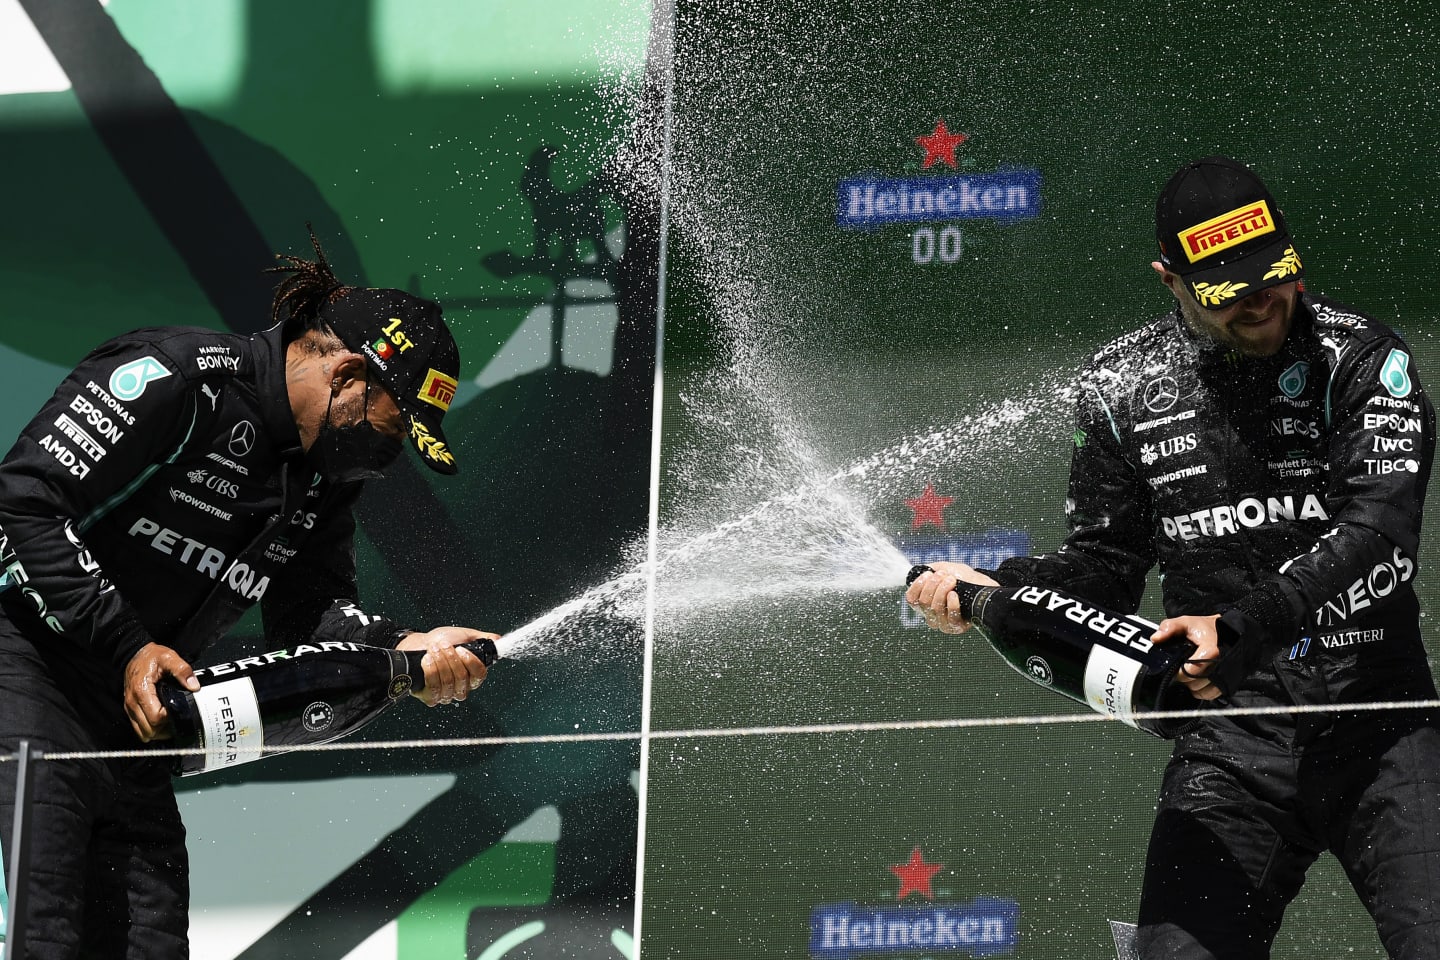 PORTIMAO, PORTUGAL - MAY 02: Race winner Lewis Hamilton of Great Britain and Mercedes GP and third placed Valtteri Bottas of Finland and Mercedes GP celebrate with sparkling wine on the podium after the F1 Grand Prix of Portugal at Autodromo Internacional Do Algarve on May 02, 2021 in Portimao, Portugal. (Photo by Gabriel Bouys - Pool/Getty Images)